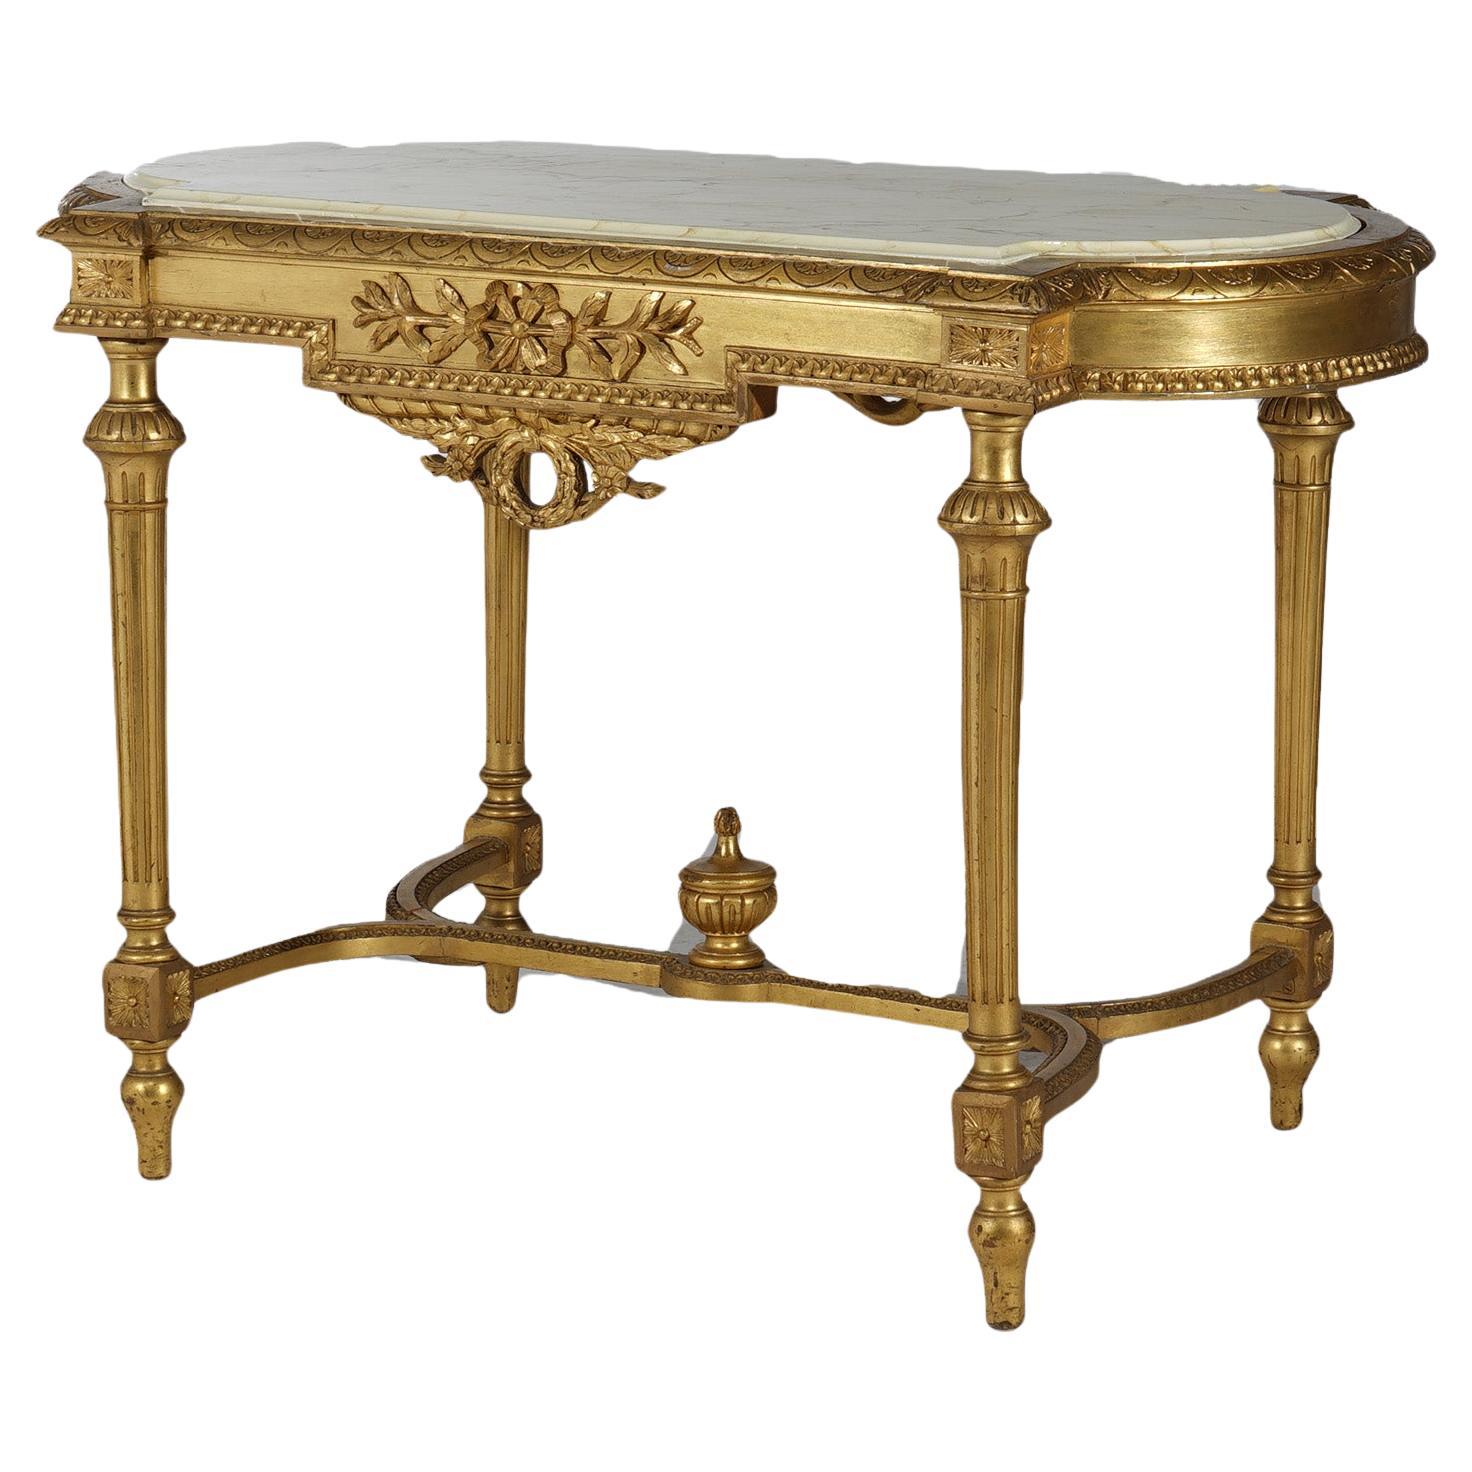 Antique French Louis XVI Style Giltwood Parlor Table with Faux Painted Top 19thC For Sale